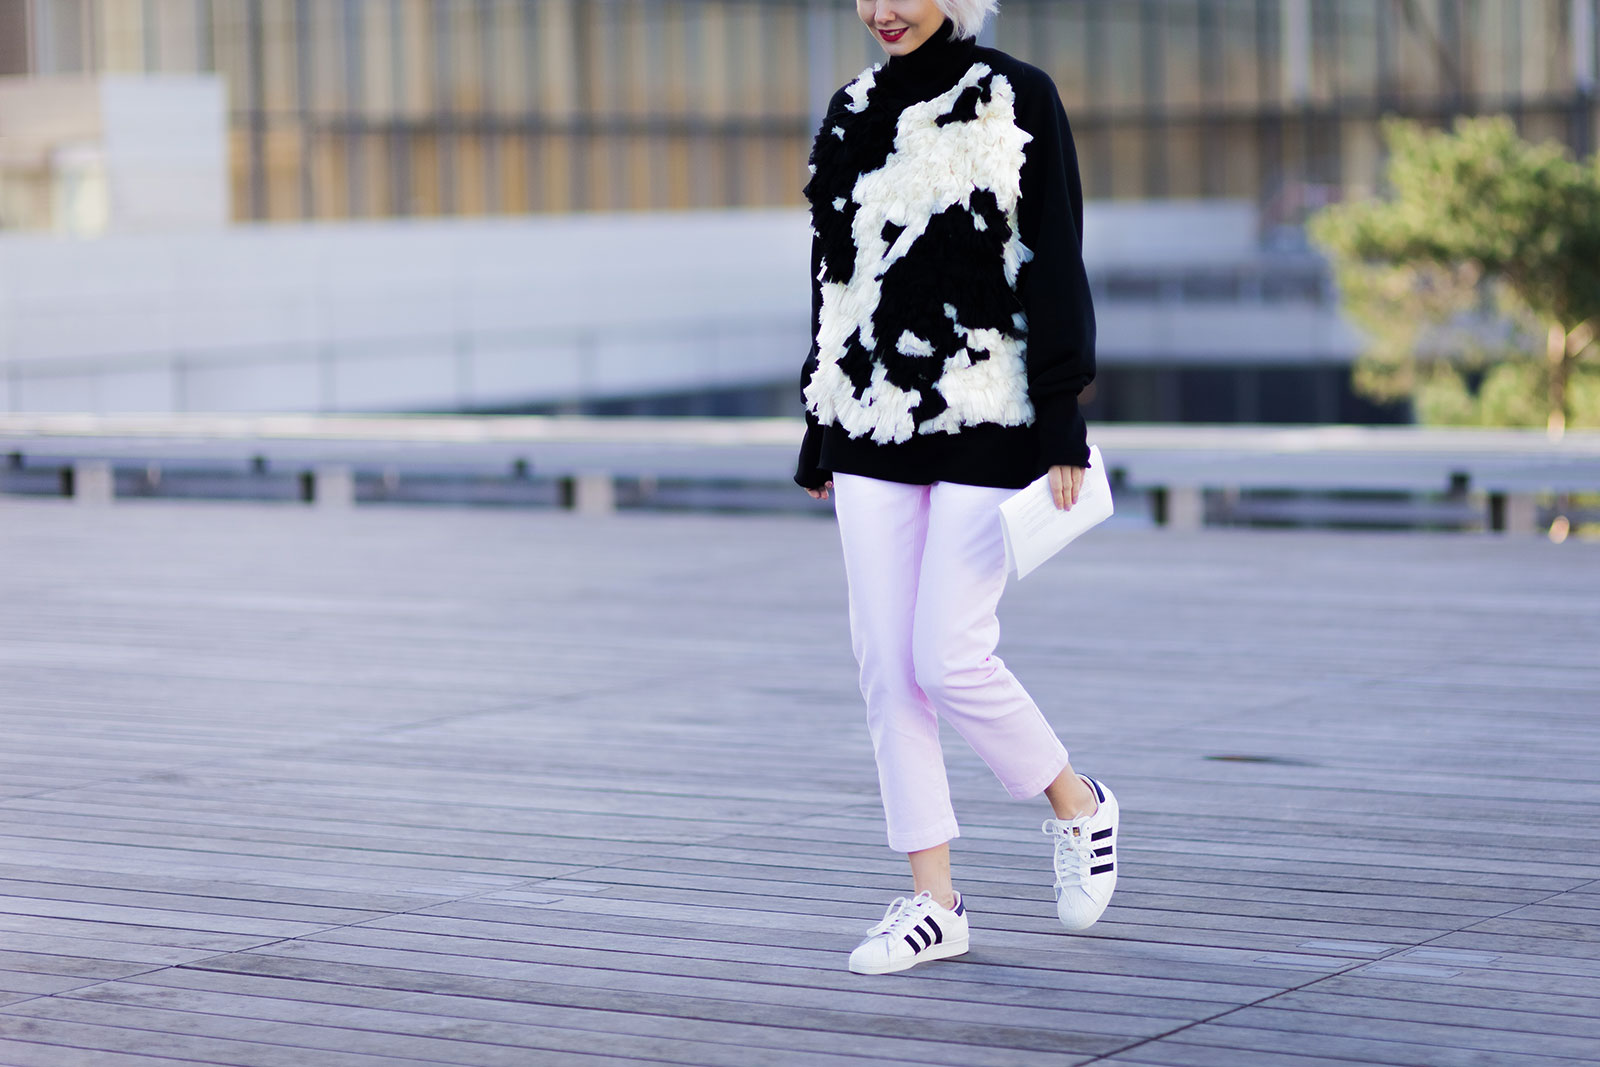 Olga Karput wearing a Nina Donis sweater, pink pants and Adidas superstar sneakers after the Christophe Lemaire Fall 2015 fashion show in Paris, France